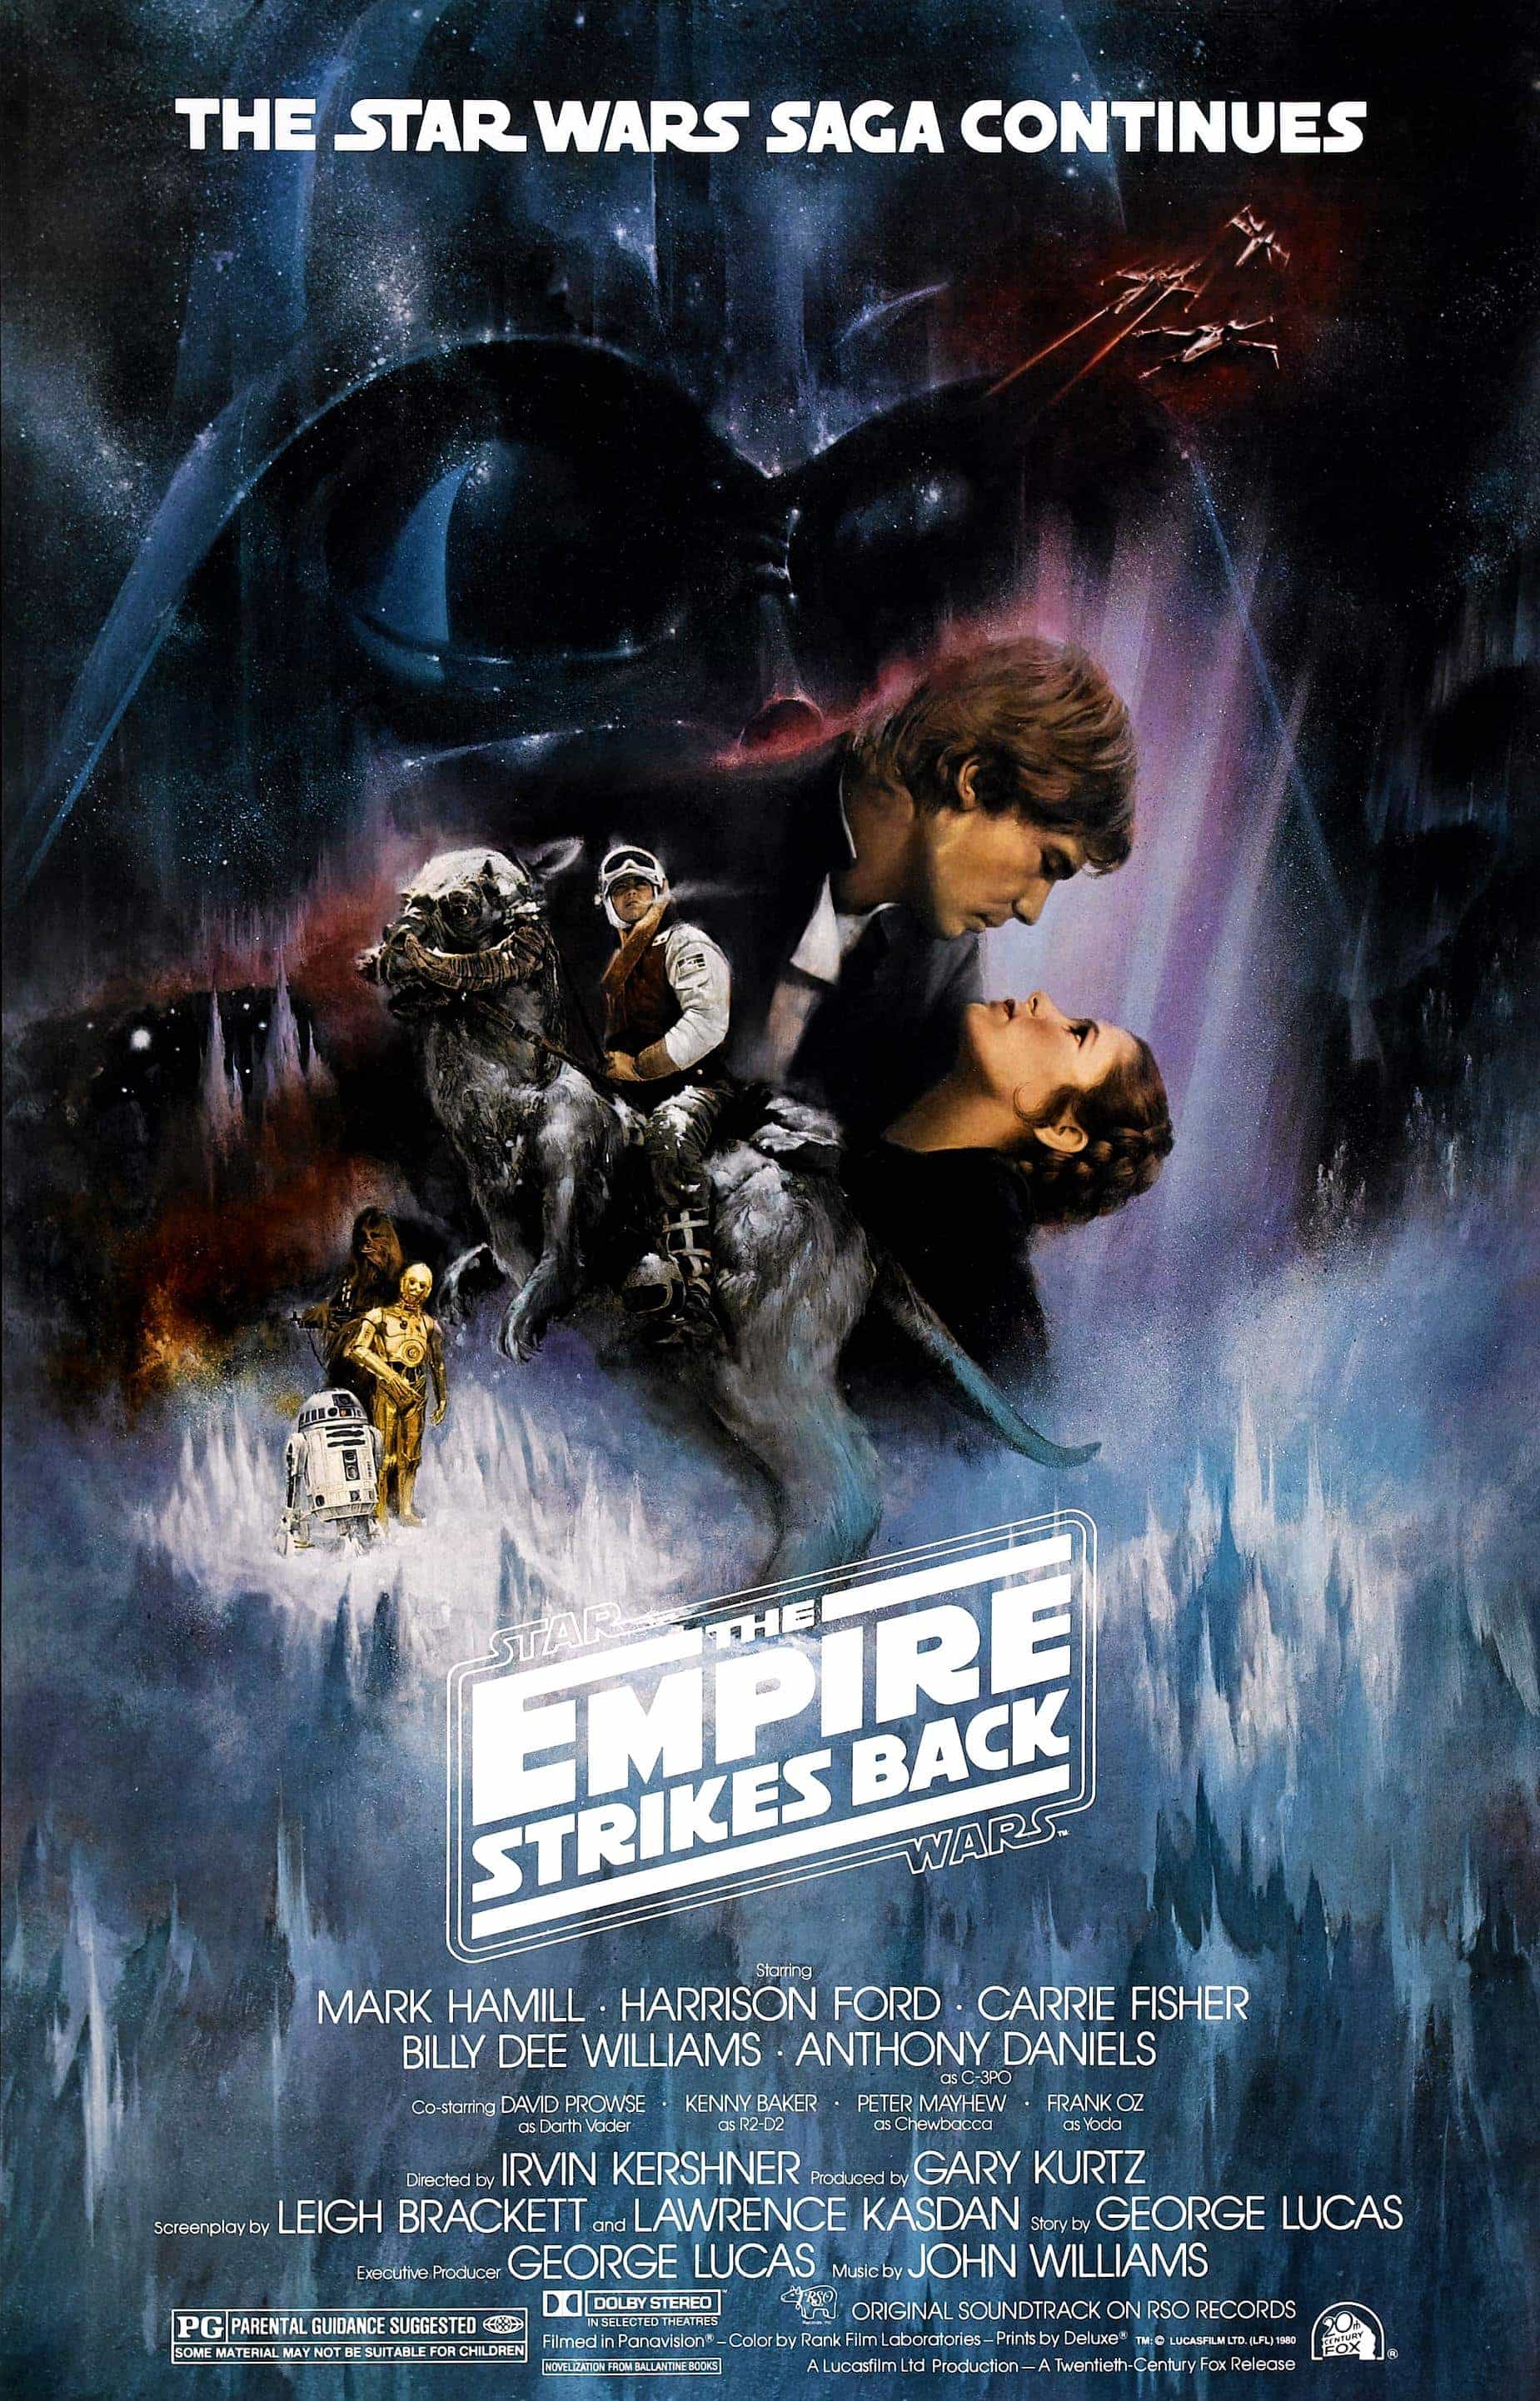 UK Box Office Weekend Report 10th - 12th July 2020:  With The Empire Strikes Back celebrating 40 years with a re-release it enters the box office at the top